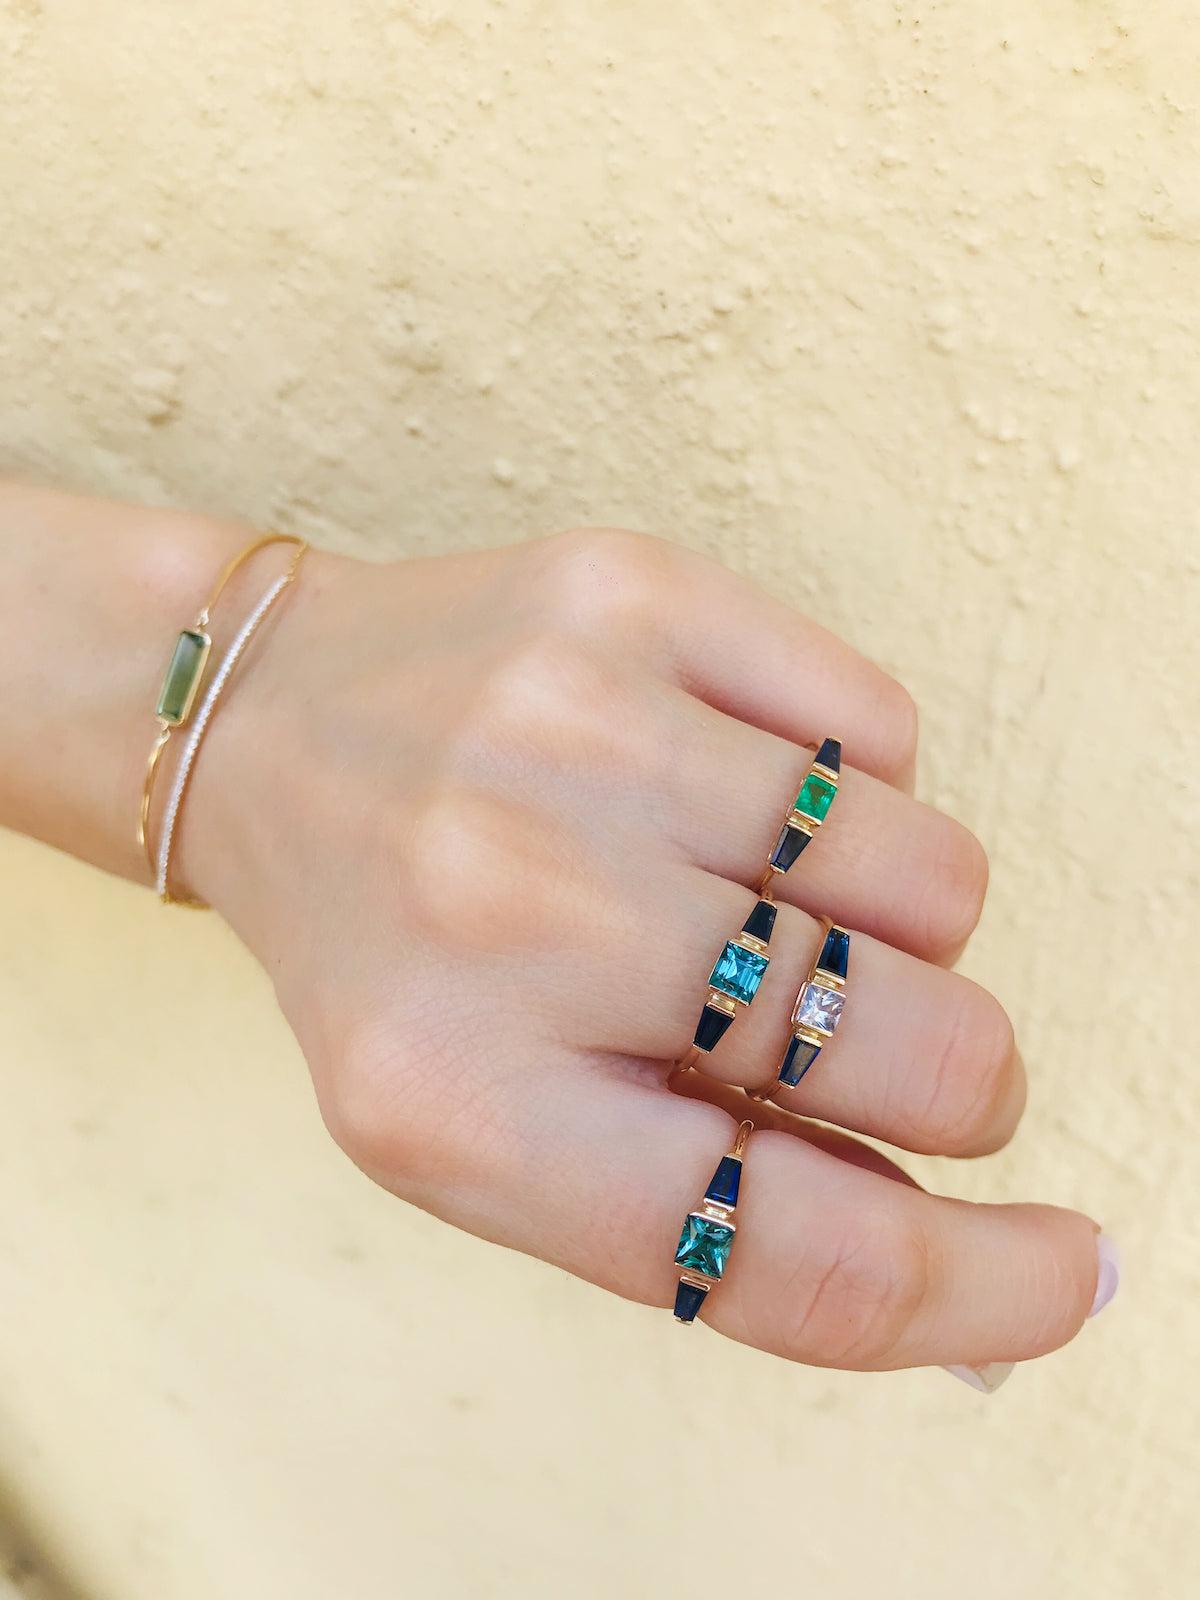 Our modern yet classic triplet rings are wonderfully hand forged with a central gemstone flanked by two gemstone shoulders.

It is a chic piece to pair with anything in your wardrobe. It stacks wonderfully with other rings from our collection or can